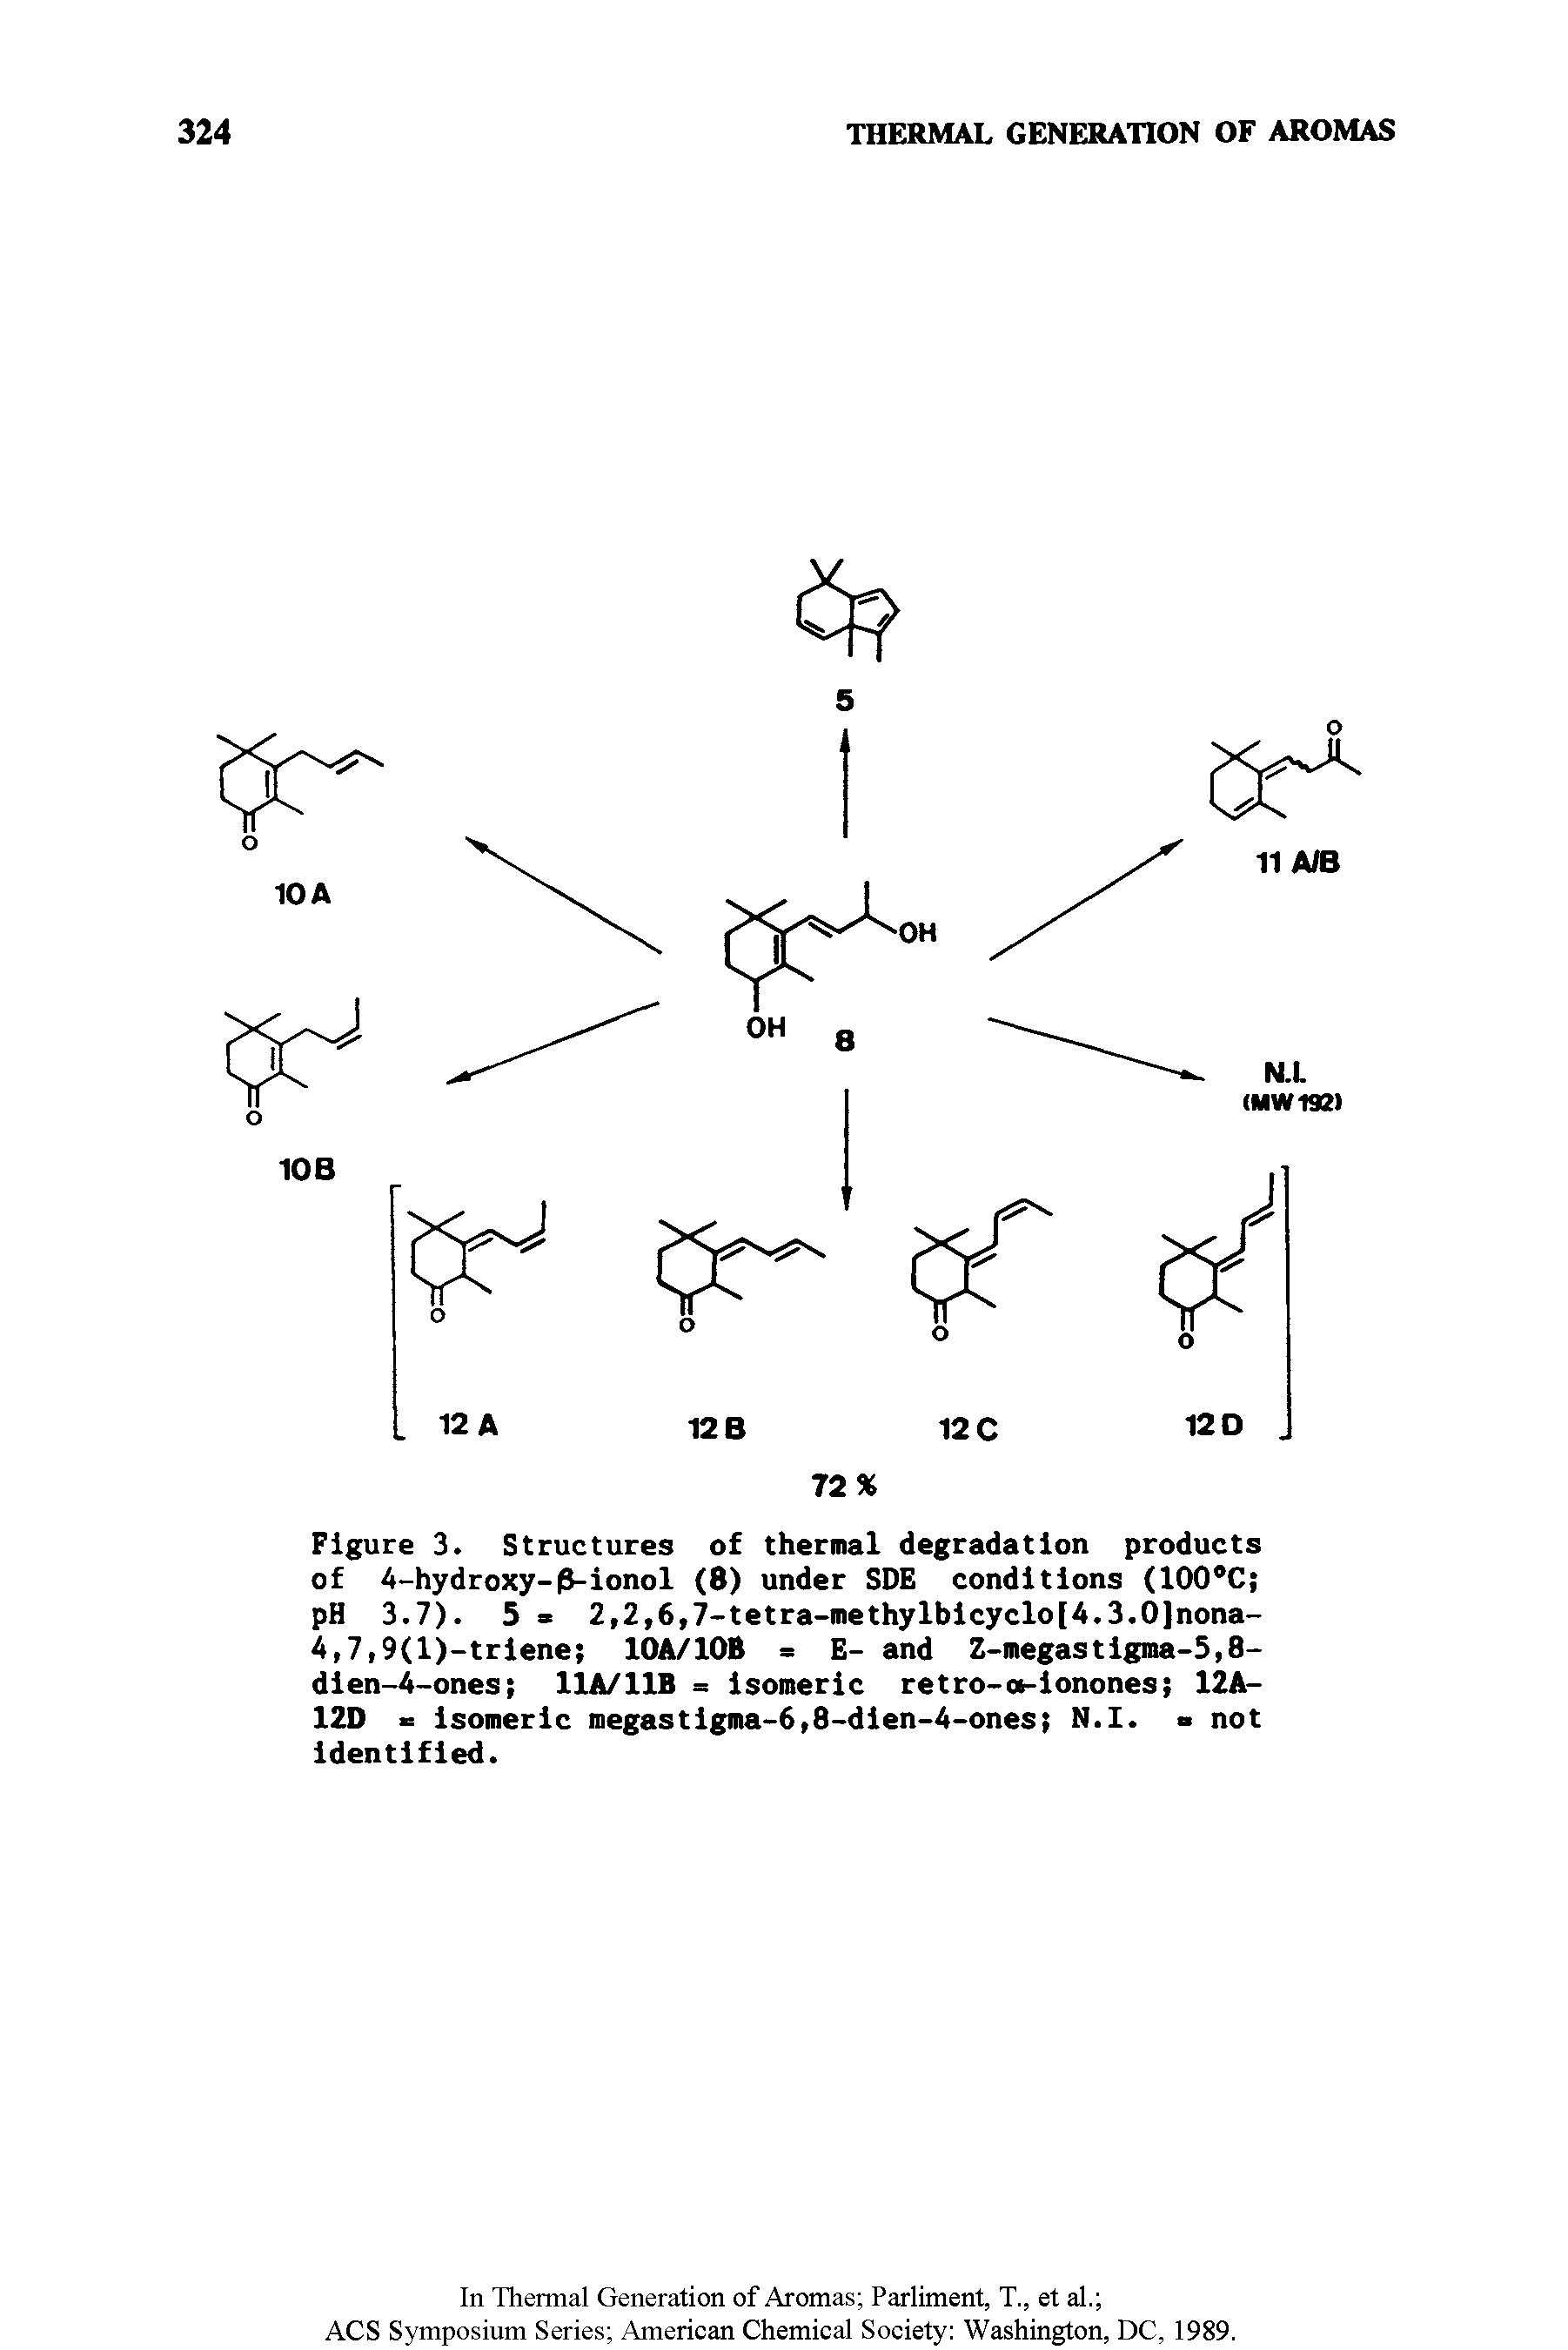 Figure 3. Structures of thermal degradation products of 4-hydroxy-(3-ionol (8) under SDE conditions (100°C pH 3.7). 5 = 2,2,6,7-tetra-methylbicyclo[4.3.0Jnona-4,7,9(l)-triene 10A/10B = E- and Z-megastigma-5,8-dien-4-ones 11A/11B = isomeric retro-o-ionones 12A-12D = isomeric megastigma-6,8-dien-4-ones N.I. not identified.